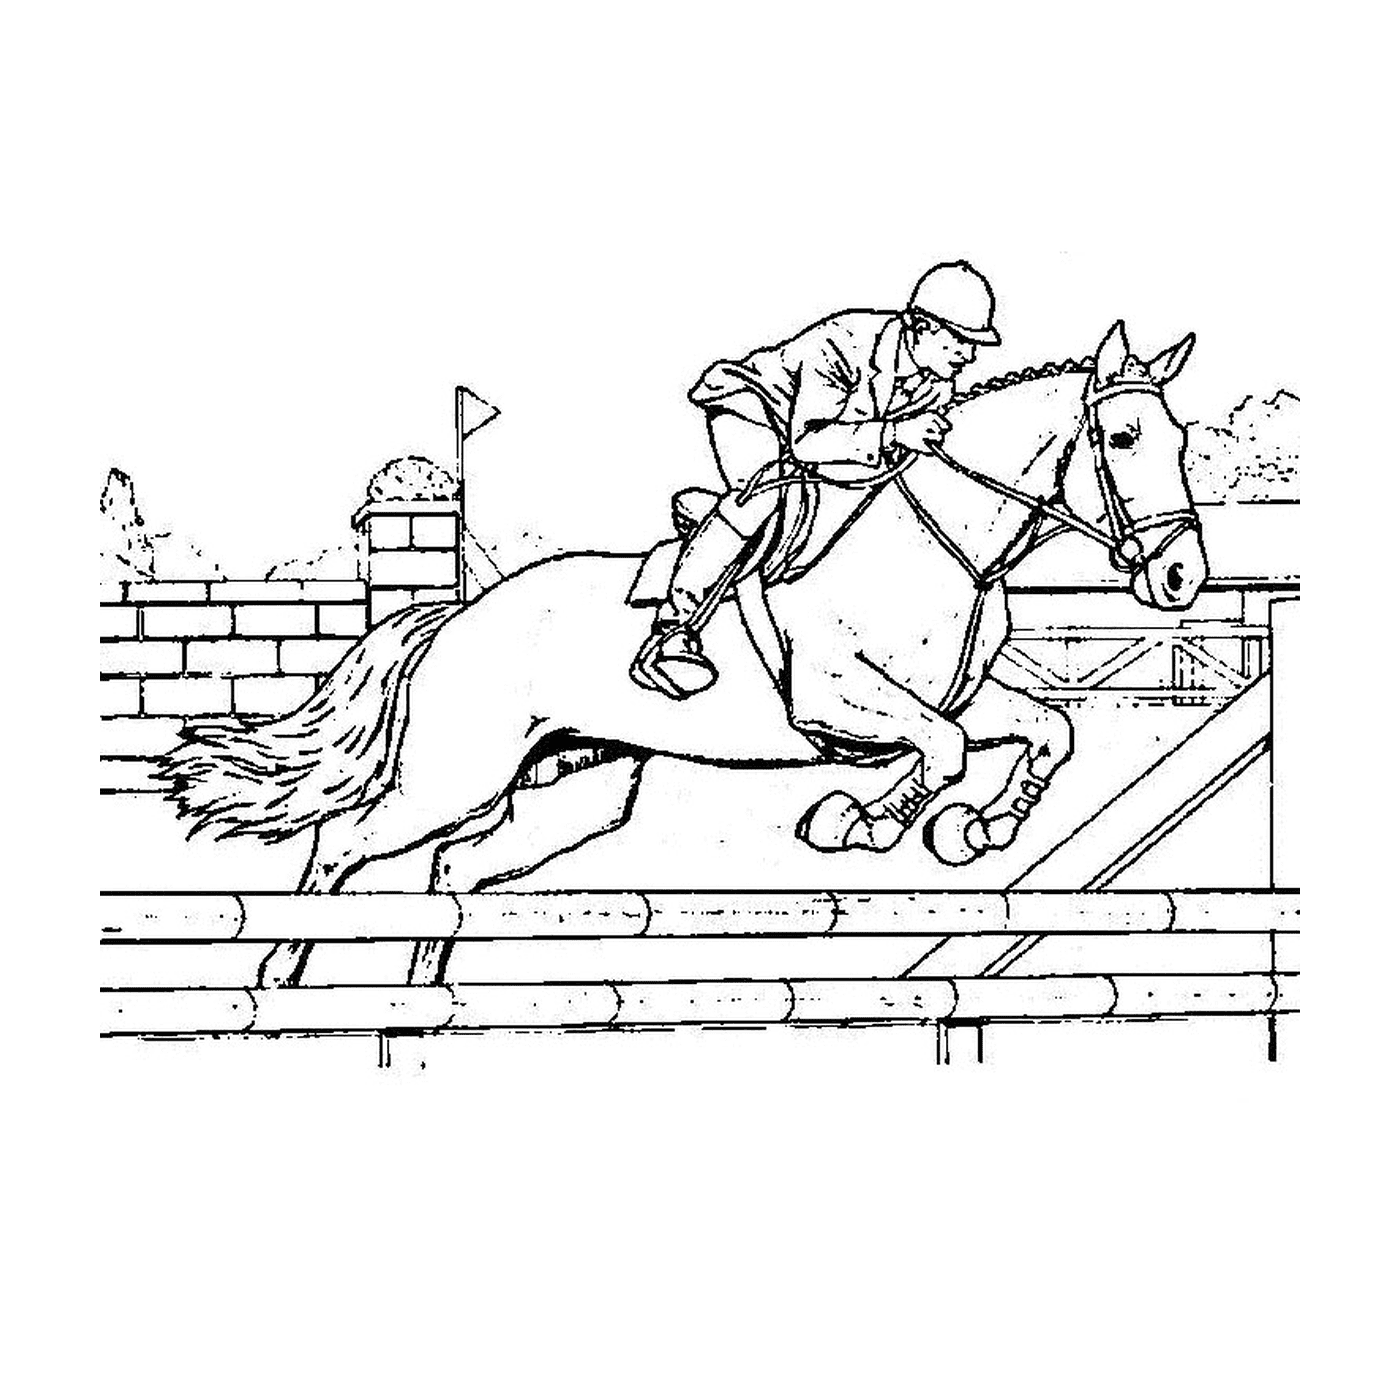  Man riding a horse and jumping an obstacle 